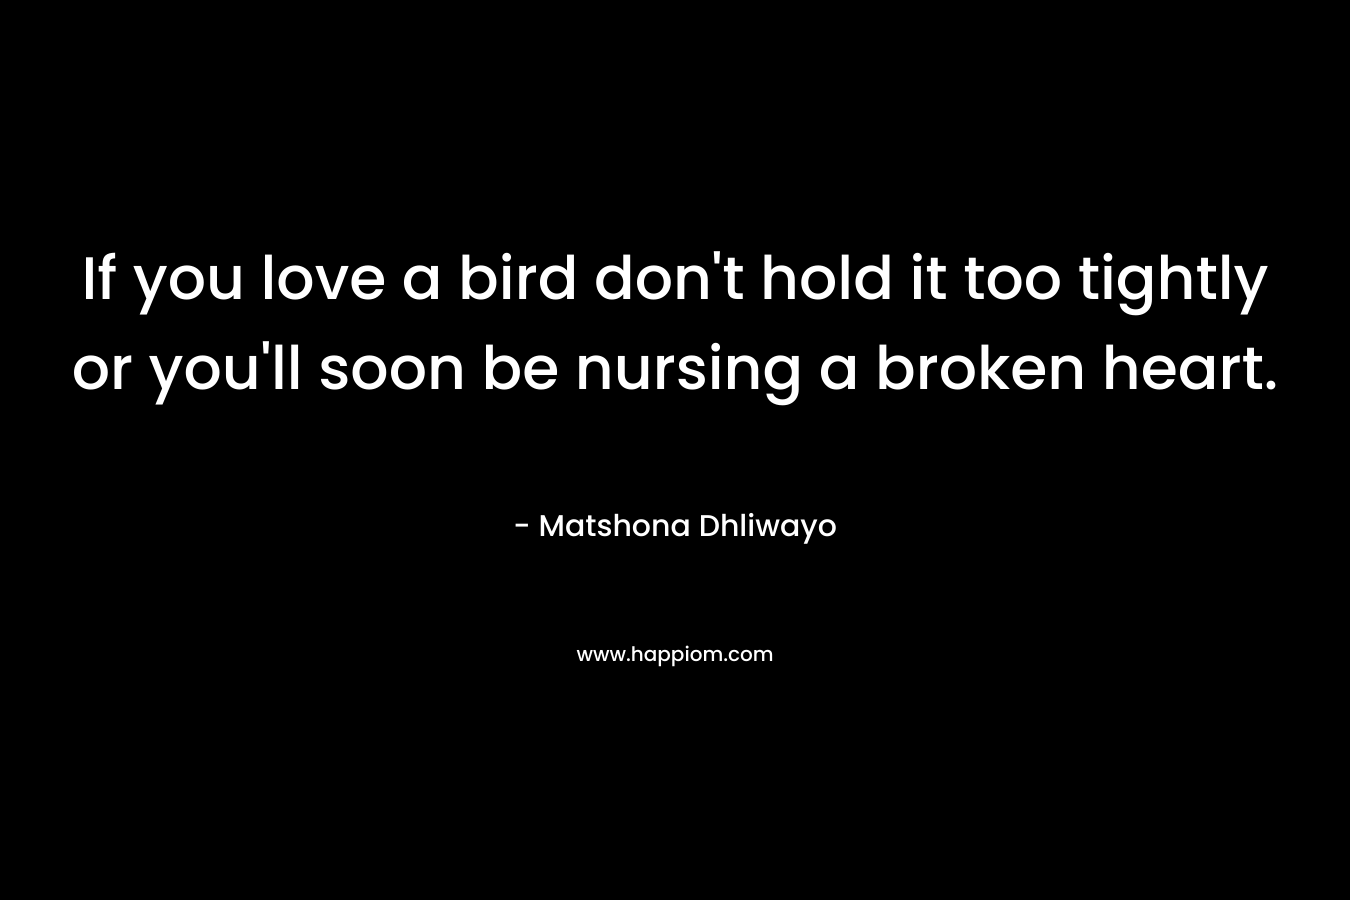 If you love a bird don’t hold it too tightly or you’ll soon be nursing a broken heart. – Matshona Dhliwayo